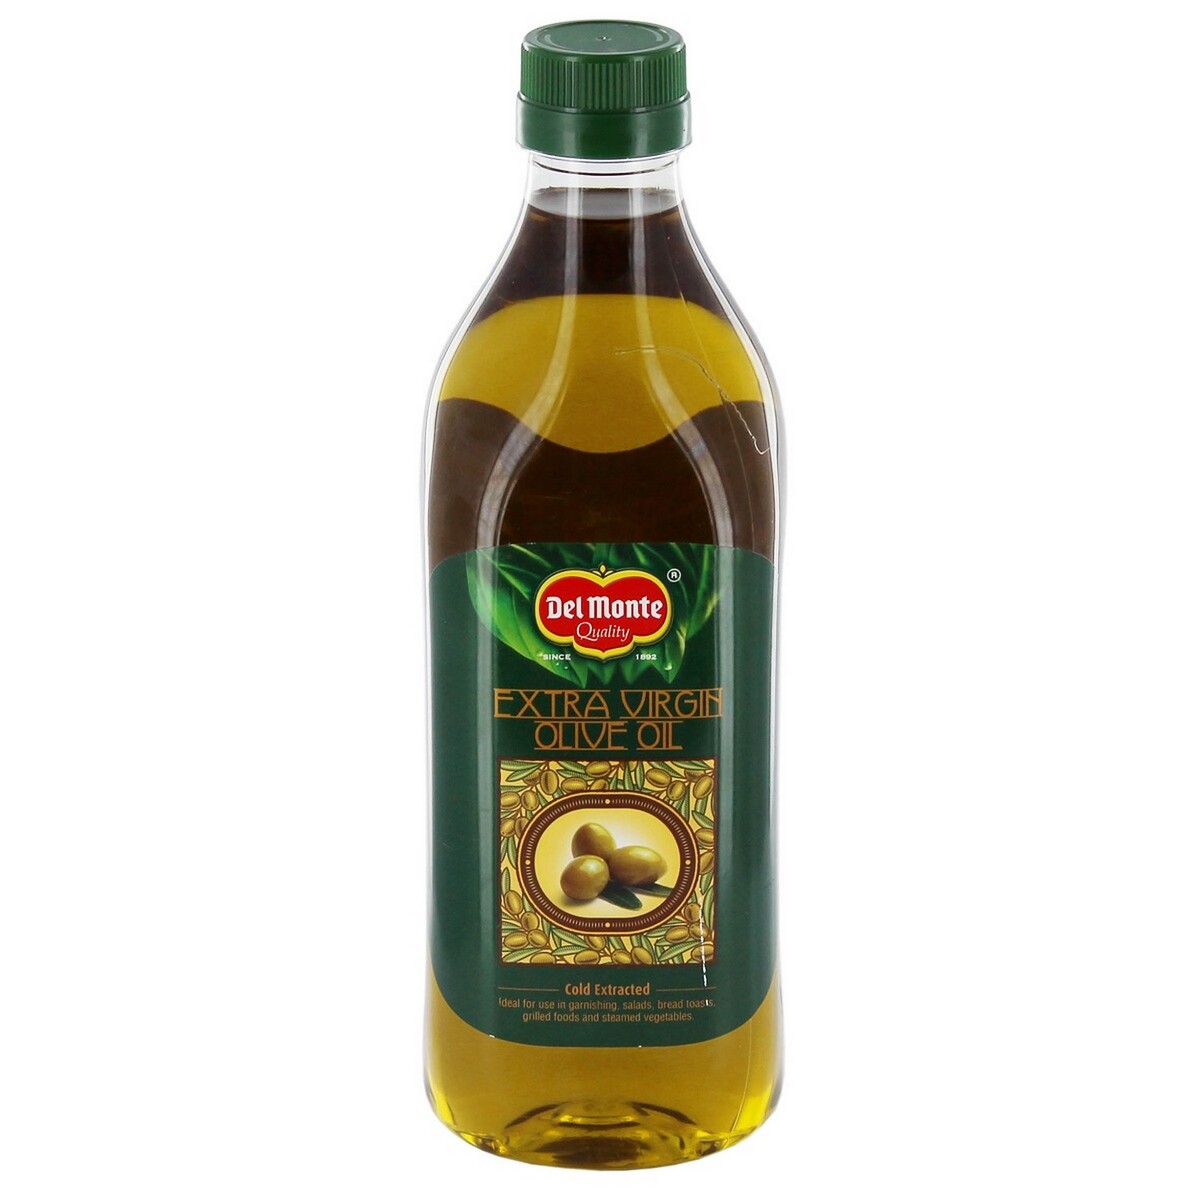 Delmonte Quality Extra Virgin Olive Oil 1Litre